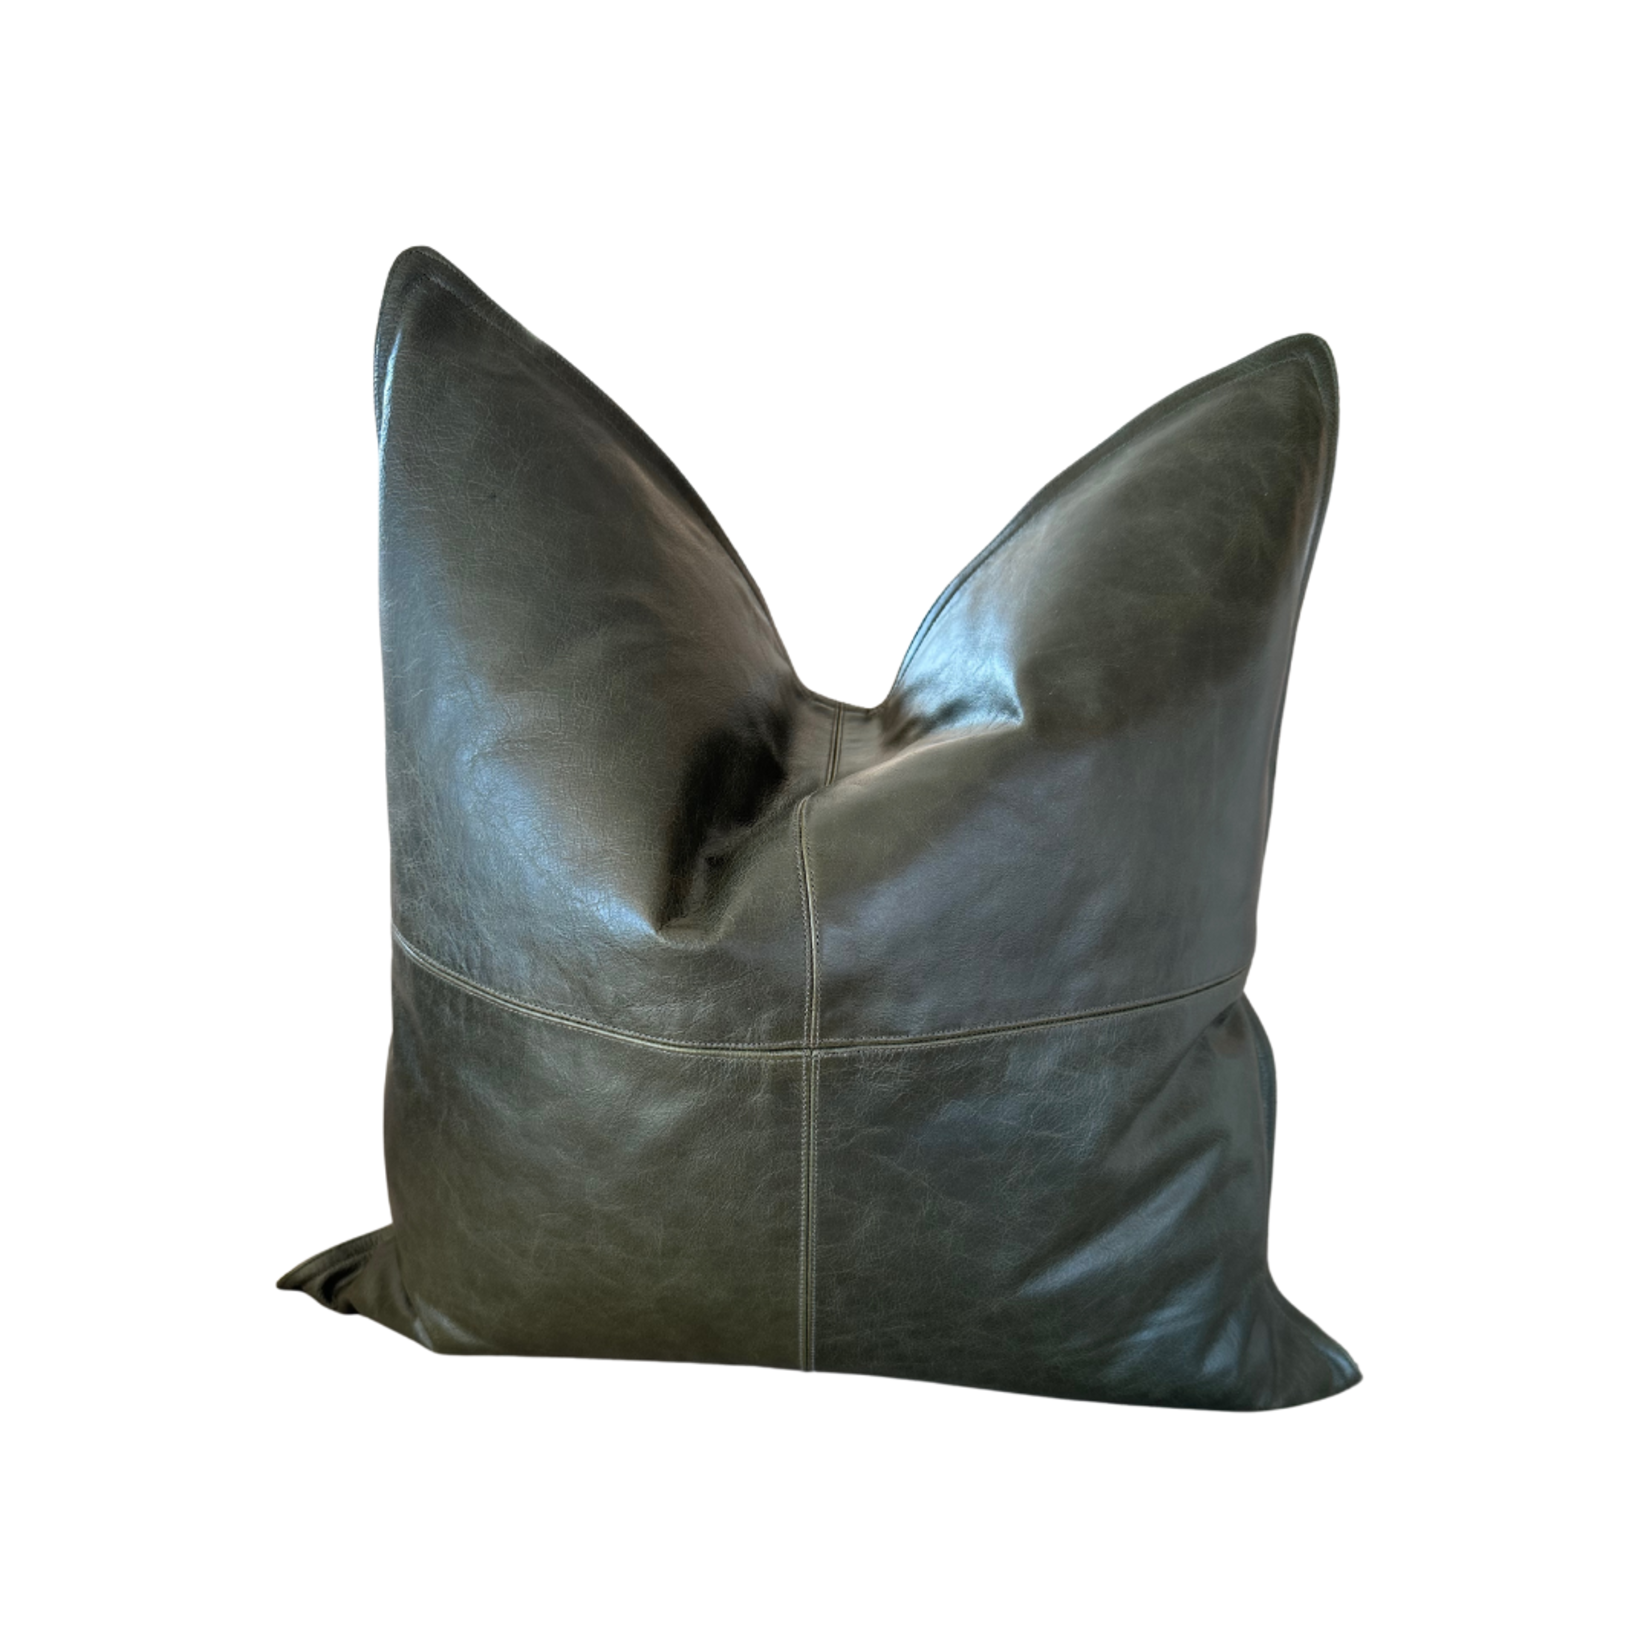 CLASSIC HOME LEATHER ACRE FOREST GREEN 22" PILLOW